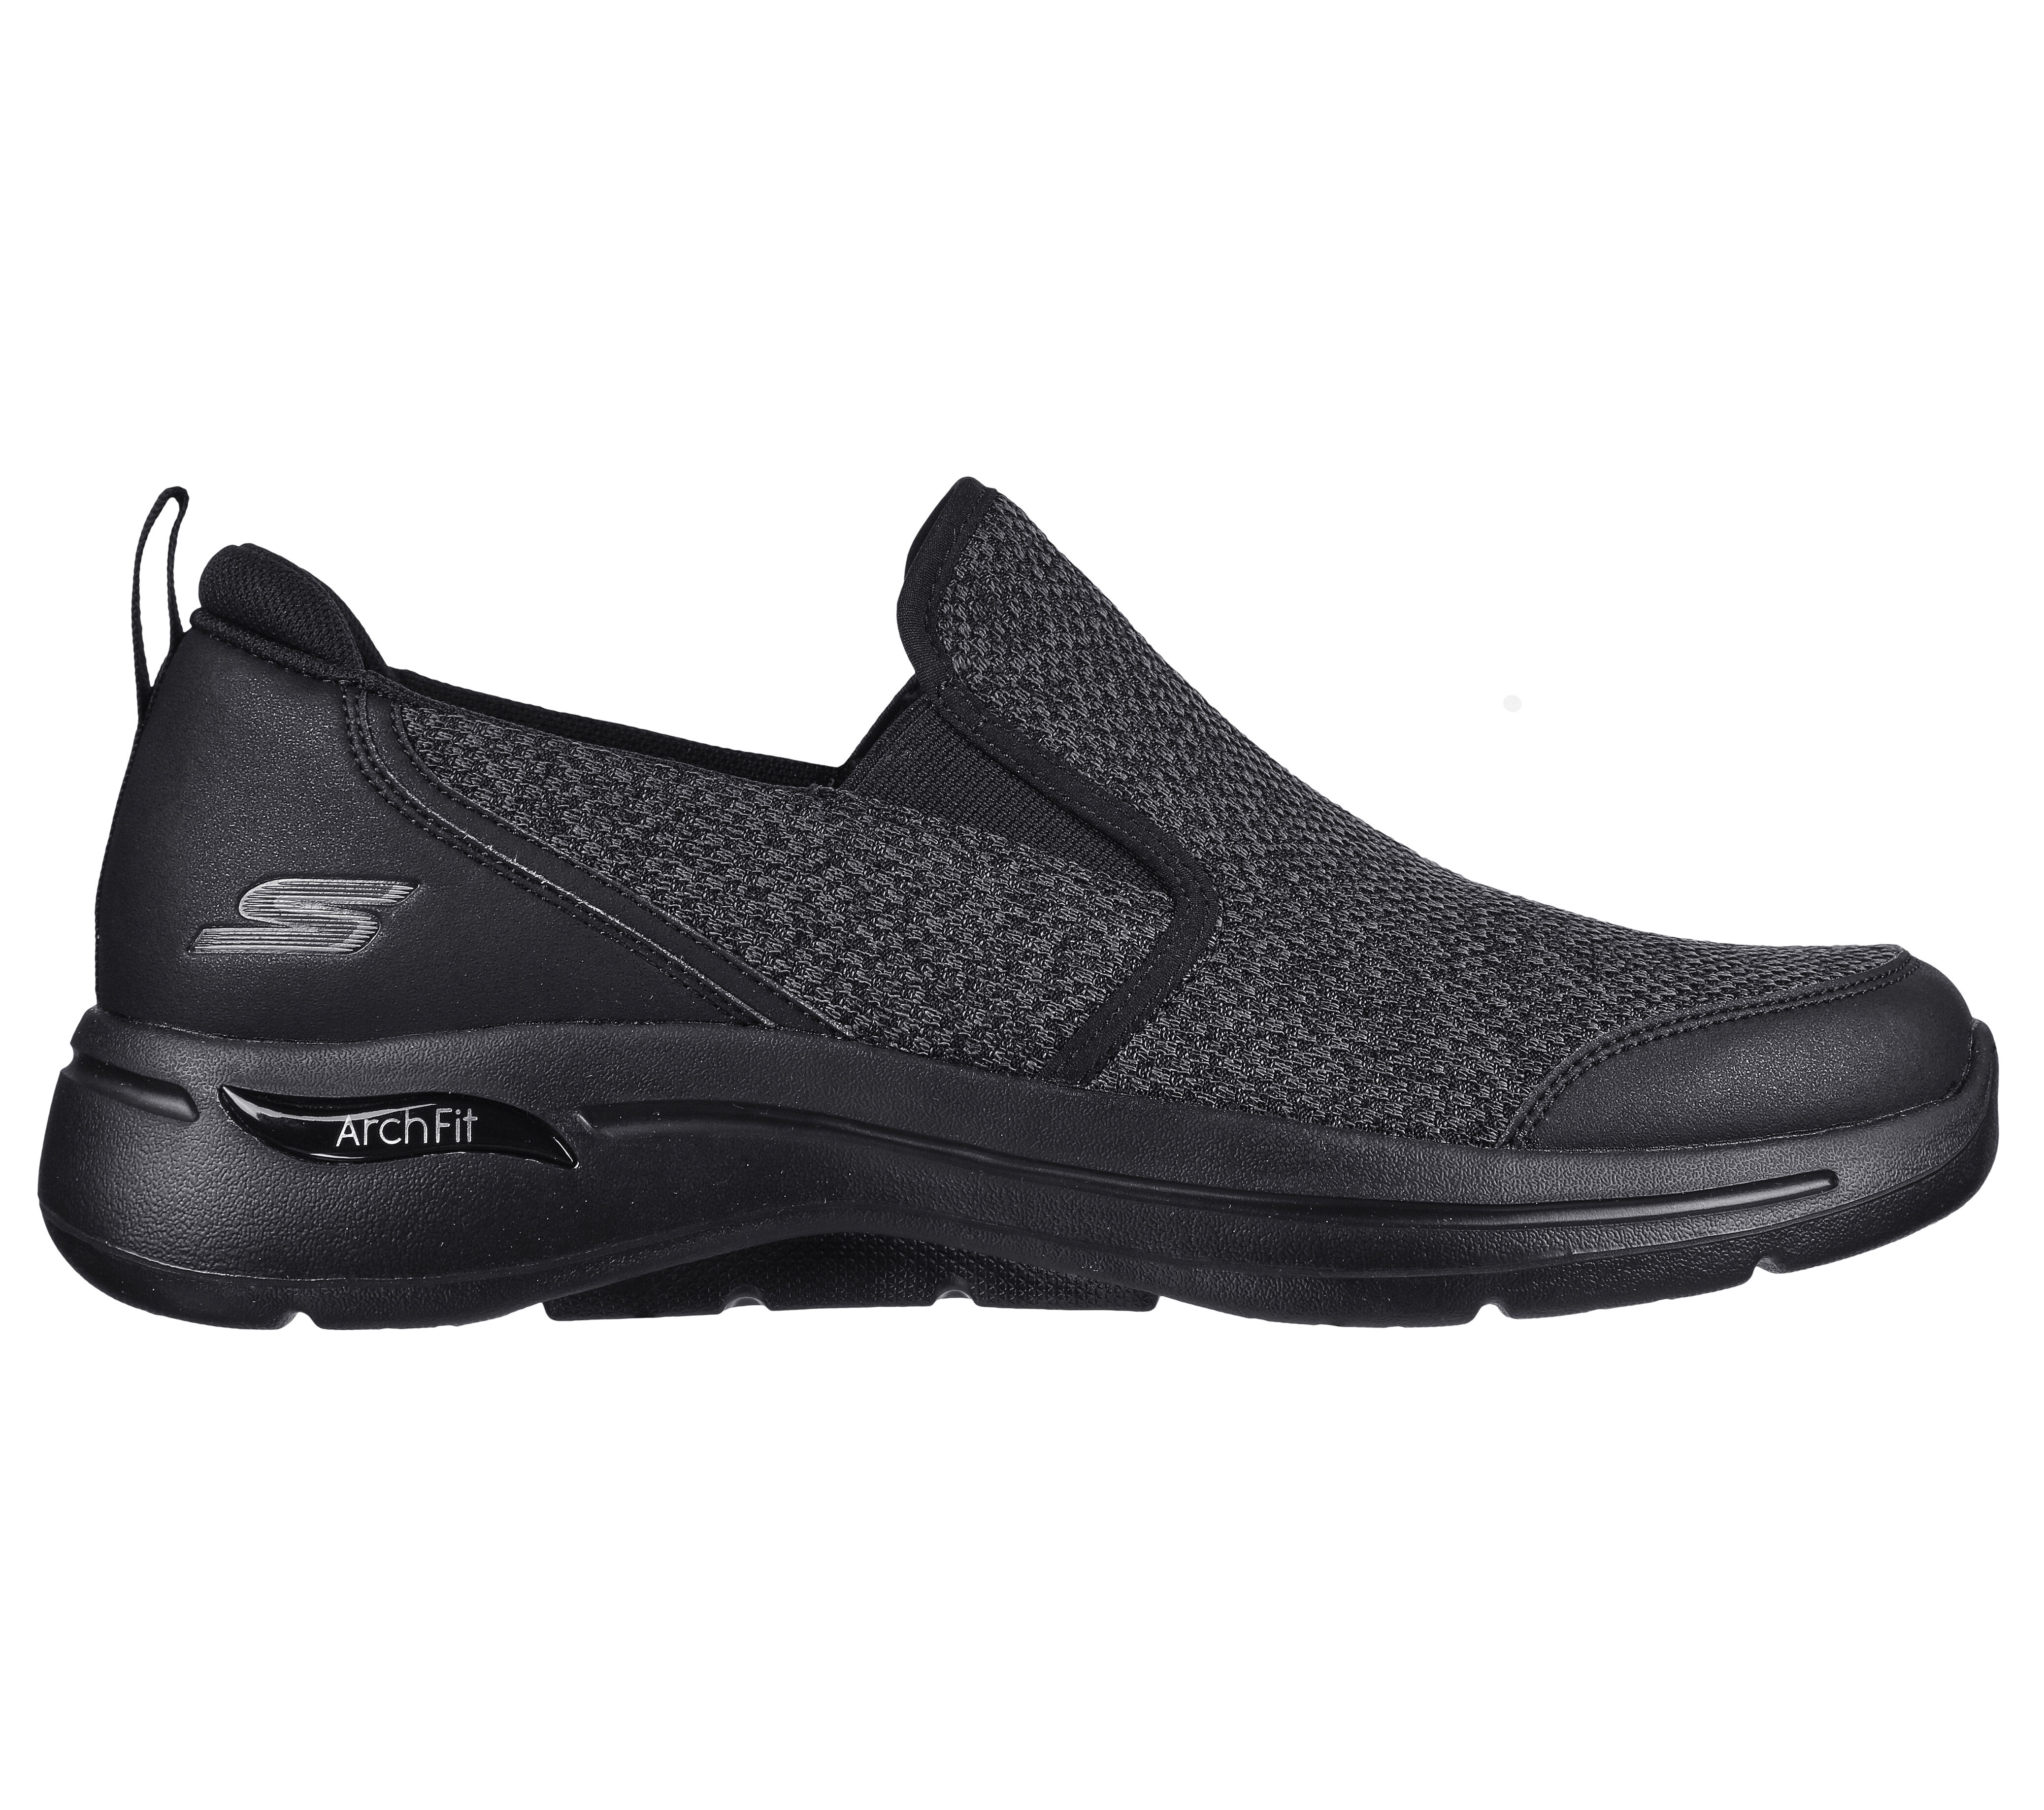 skechers mens shoes canada